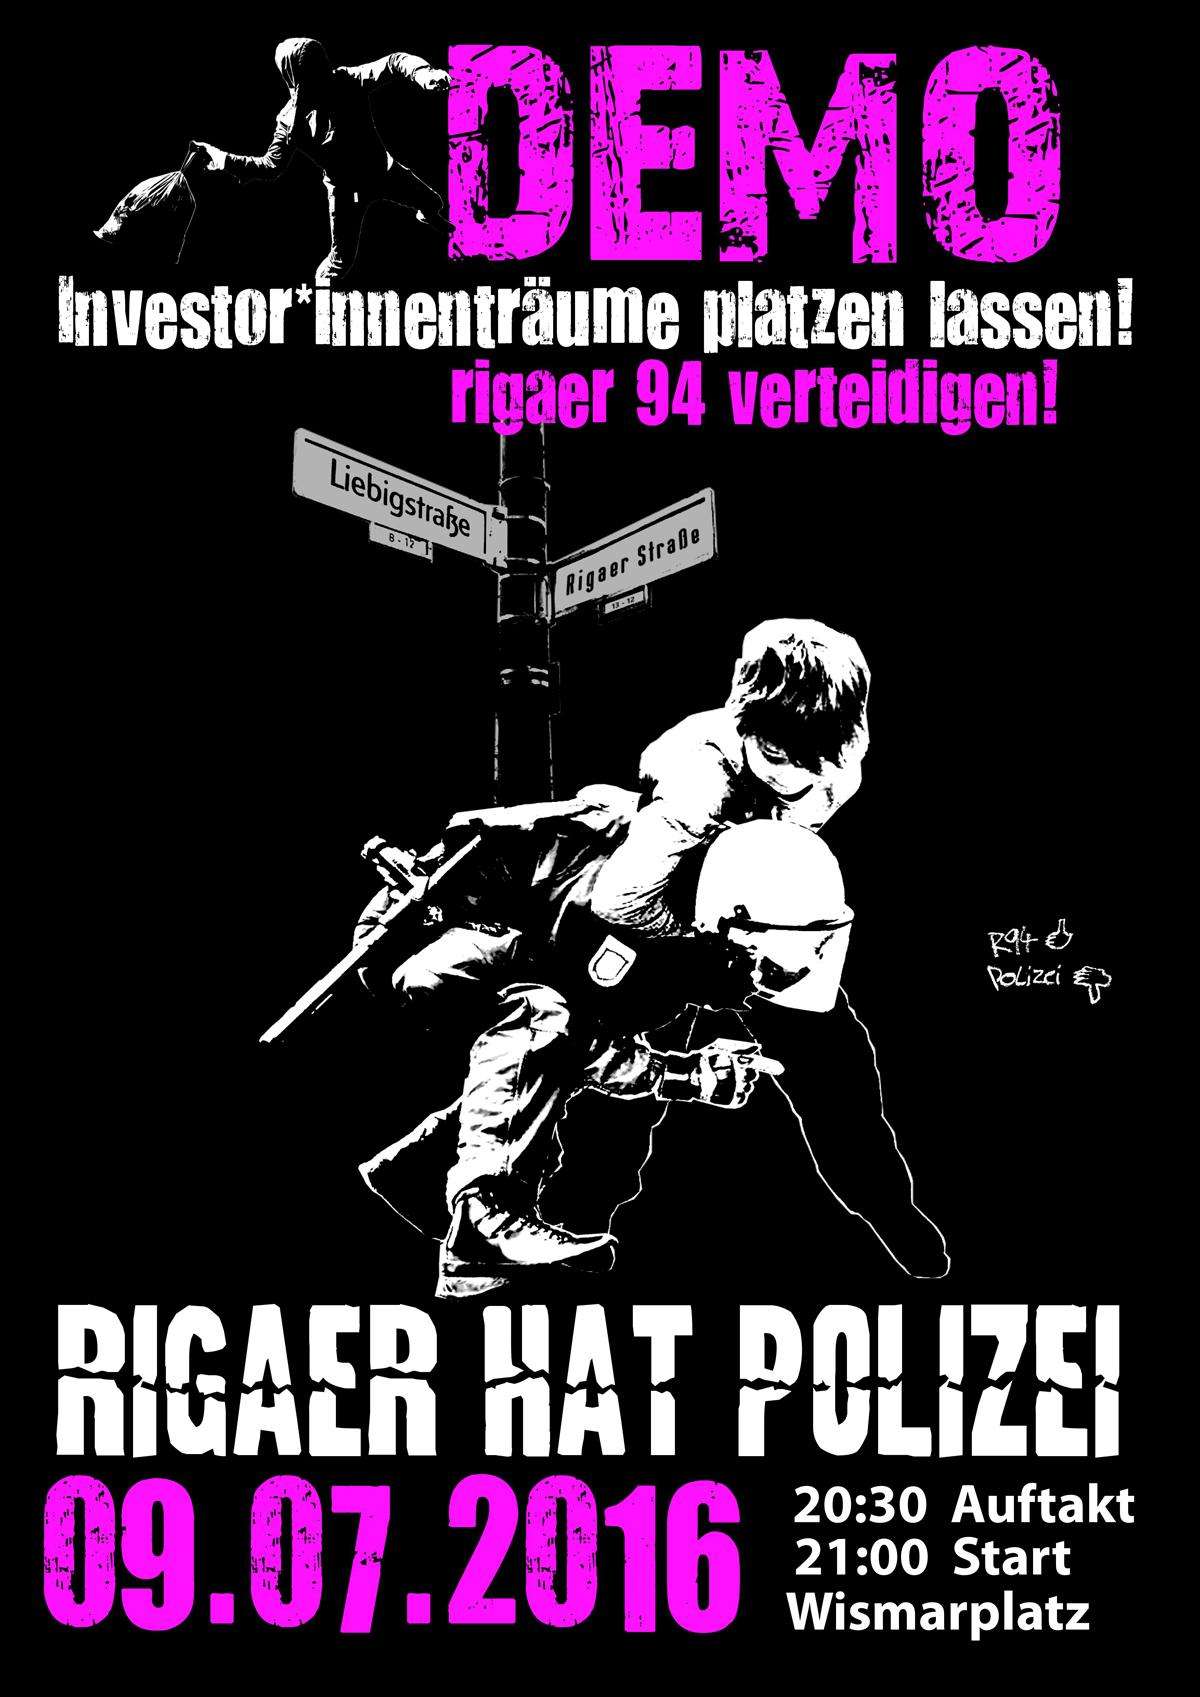 Berlin: Call out for demonstration on 9th of July